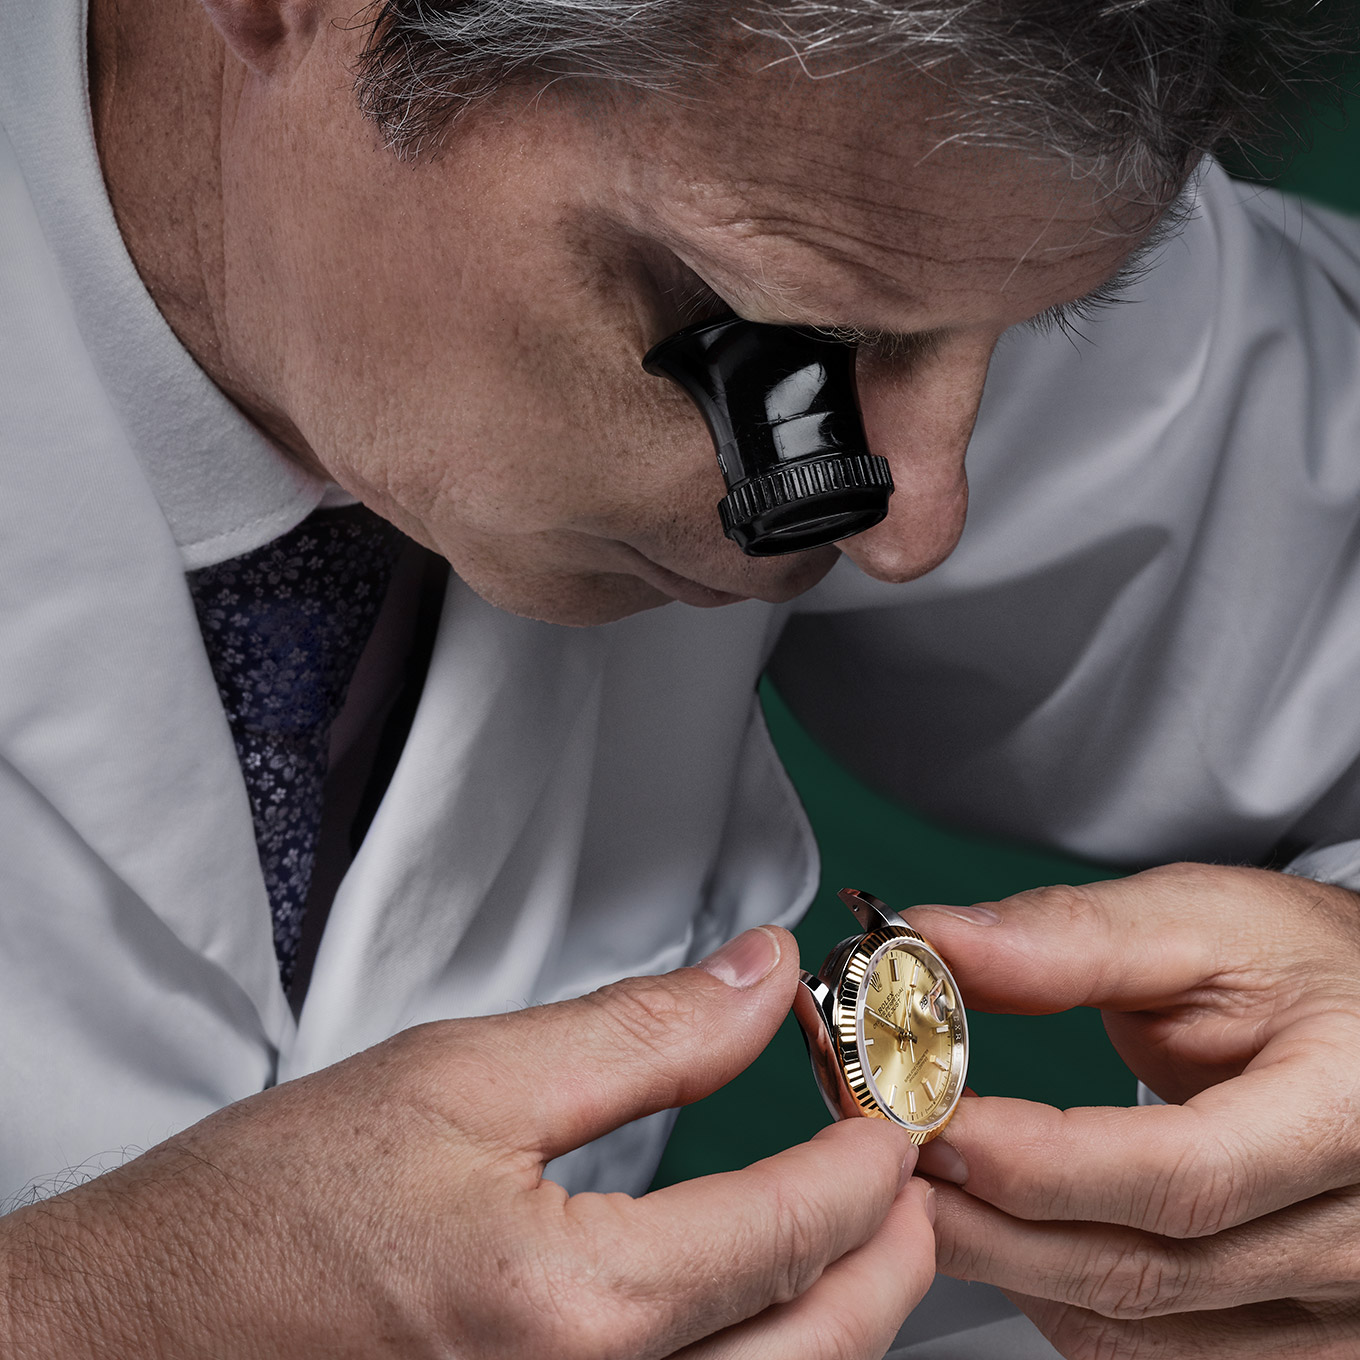 rolex watch being assessed by man with monocle viewer